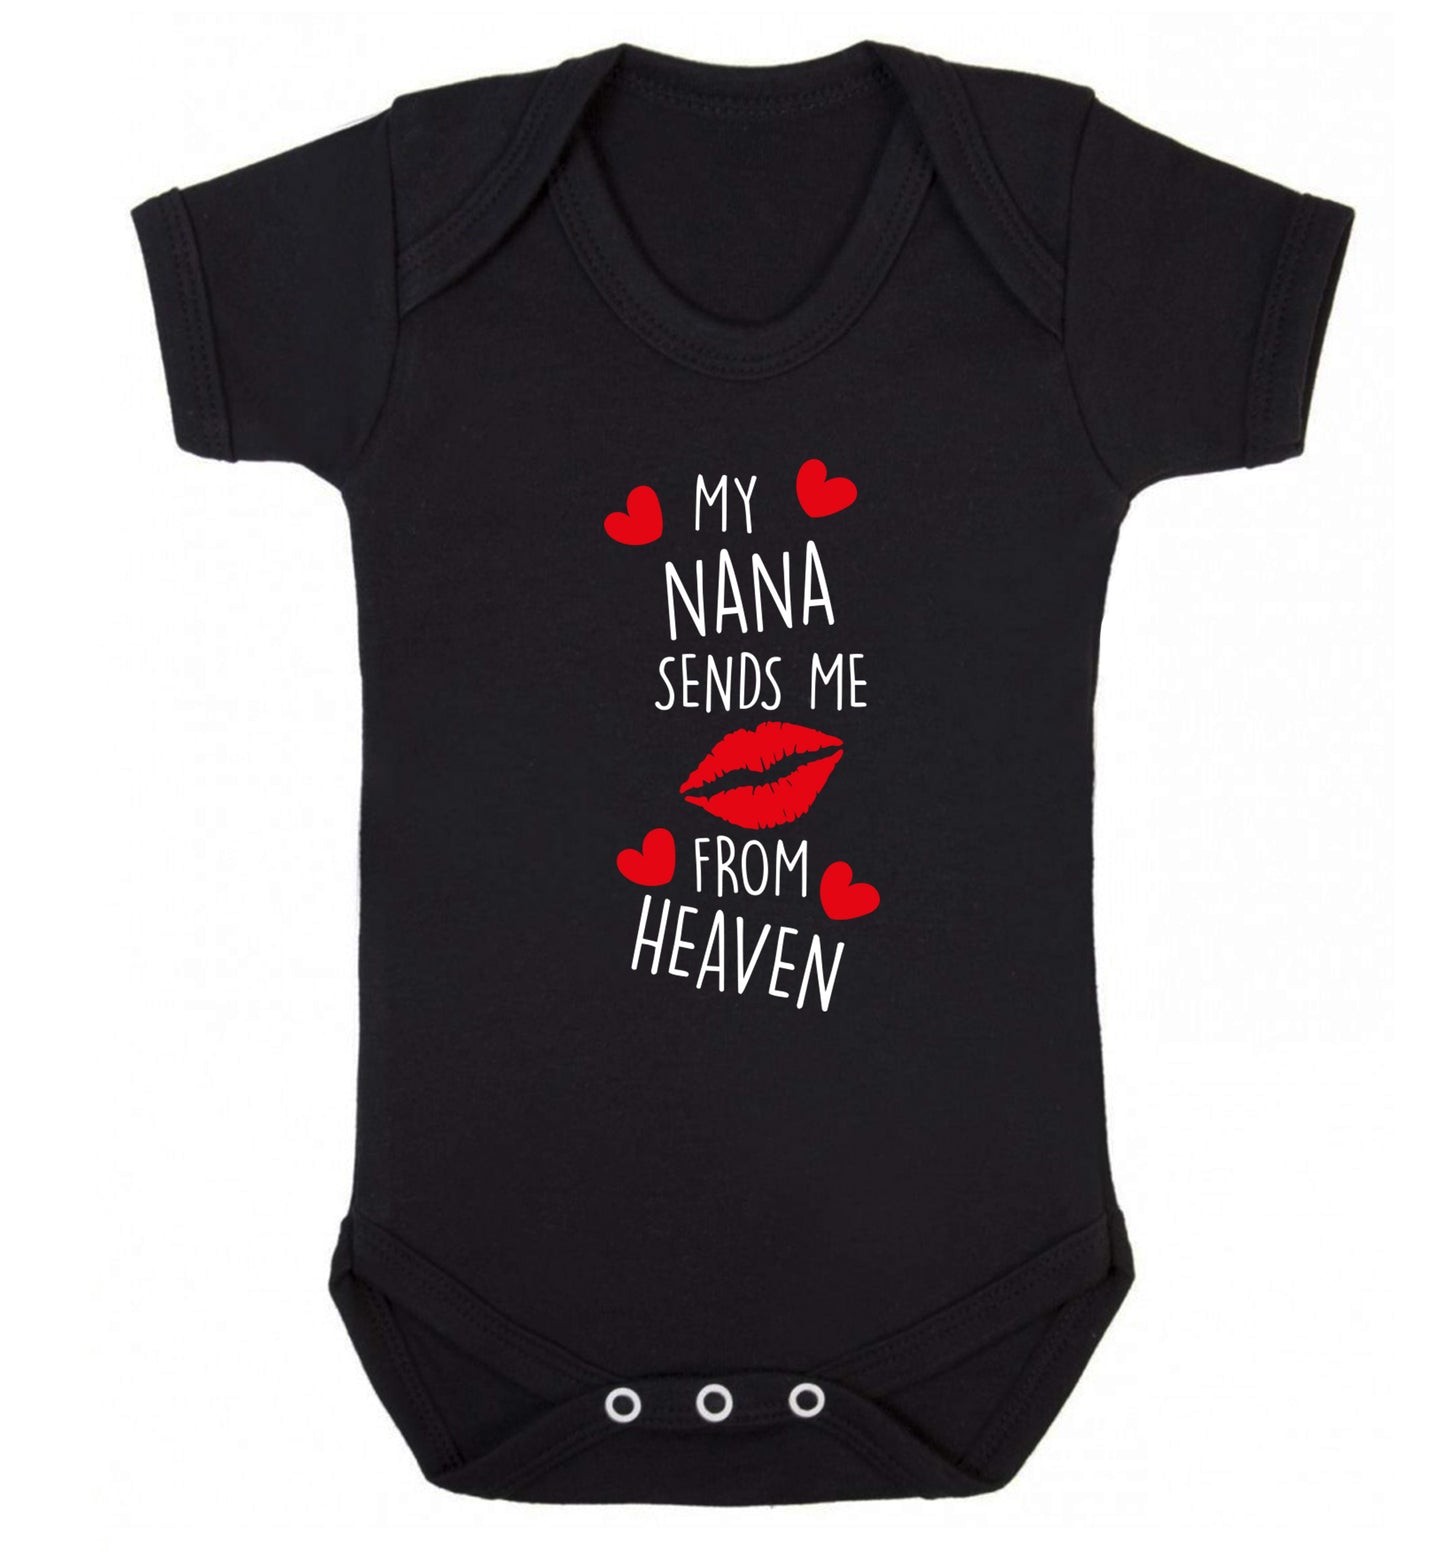 My nana sends me kisses from heaven Baby Vest black 18-24 months